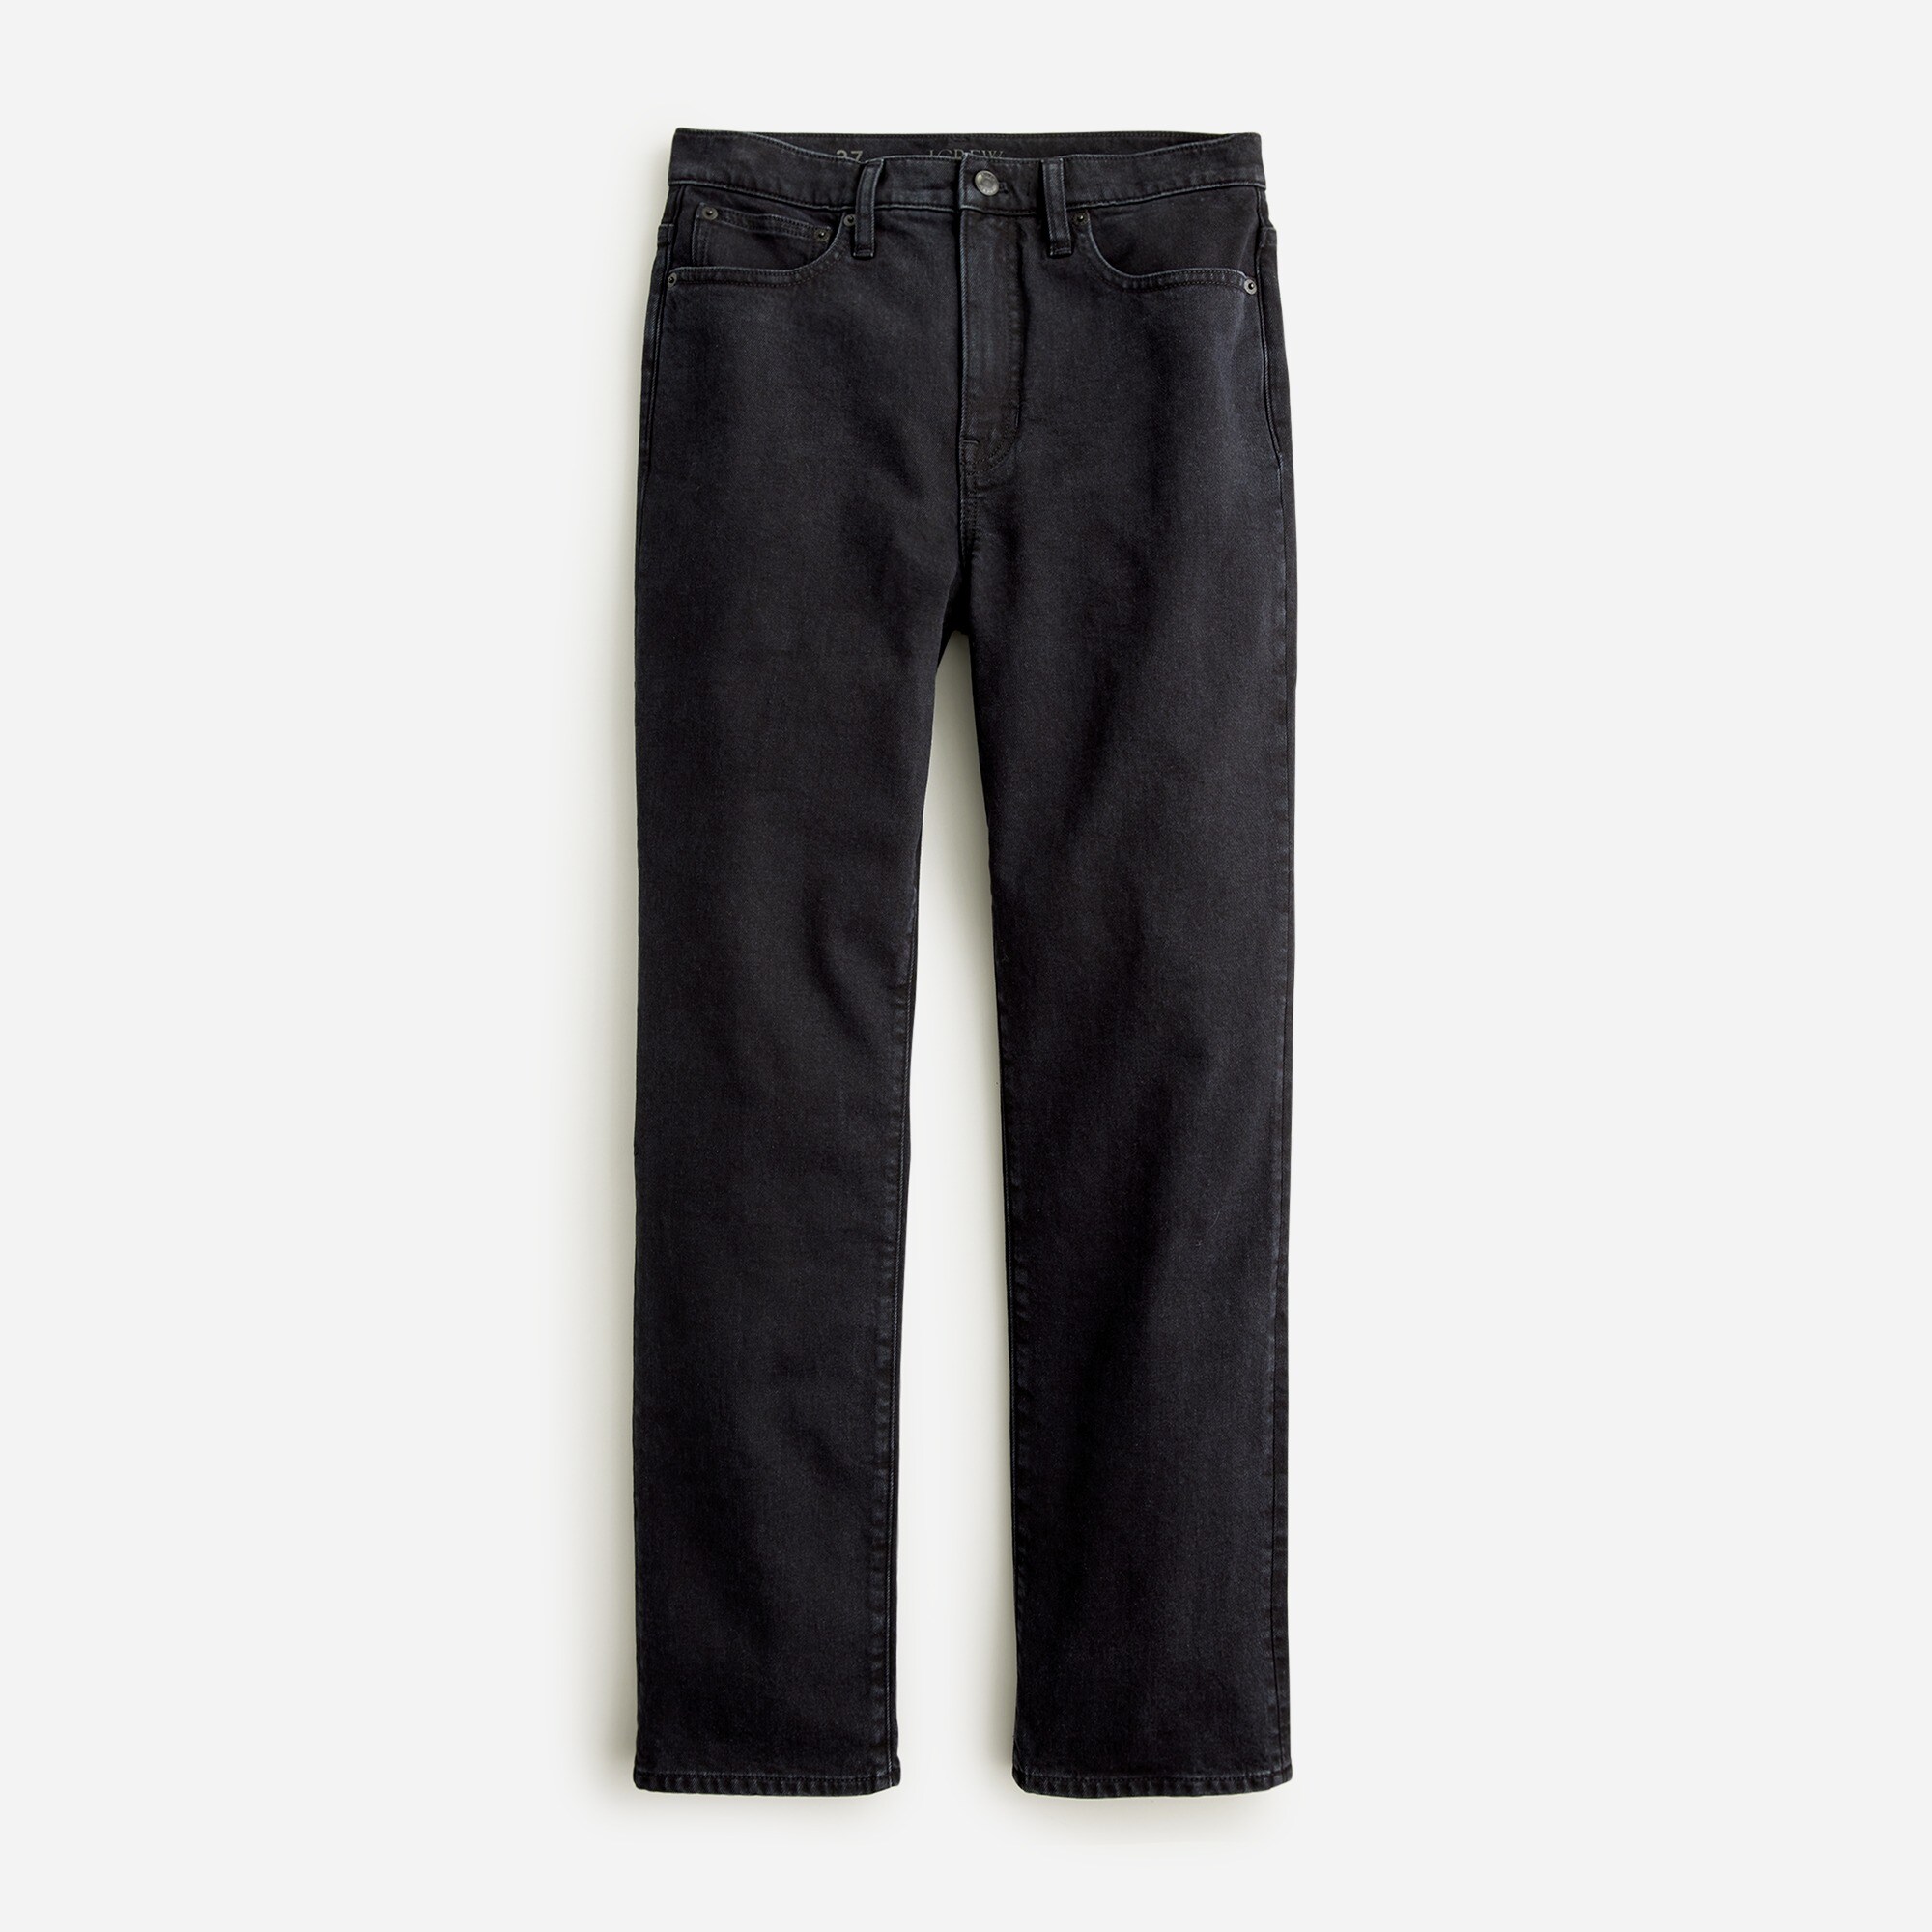  Tall classic straight jean in washed black